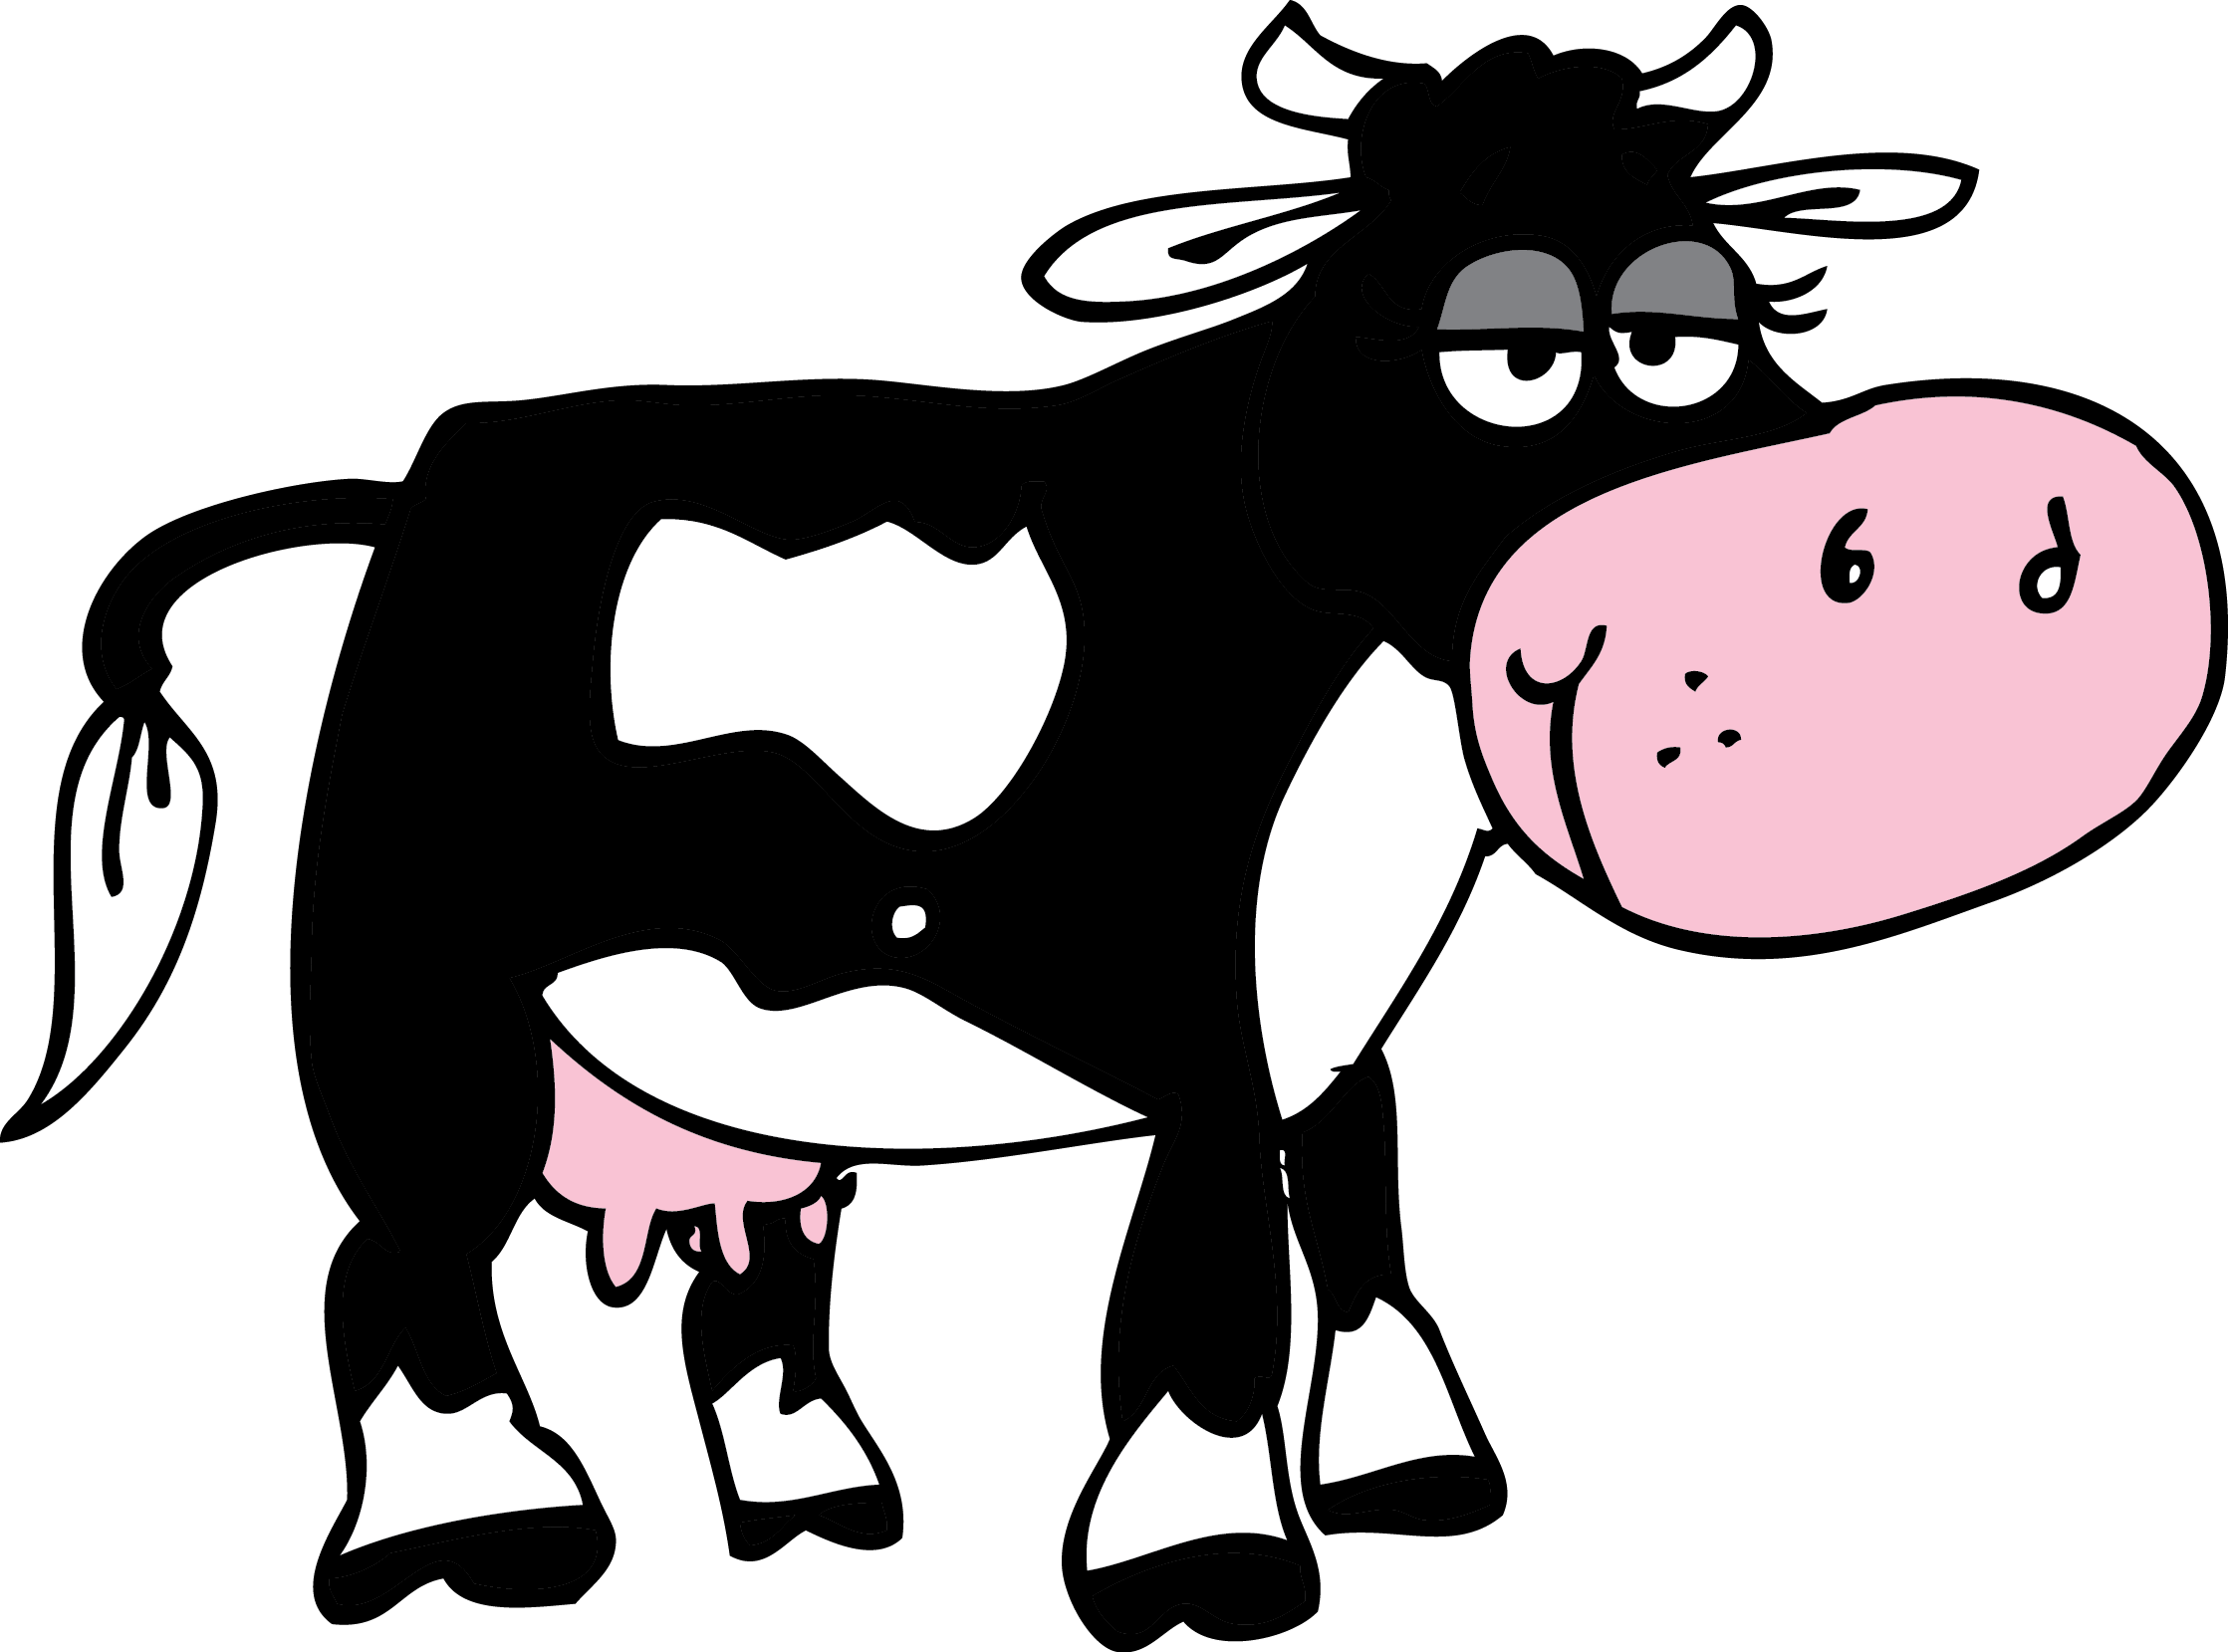 Cartoon jumping images pictures. Clipart cow cow's milk